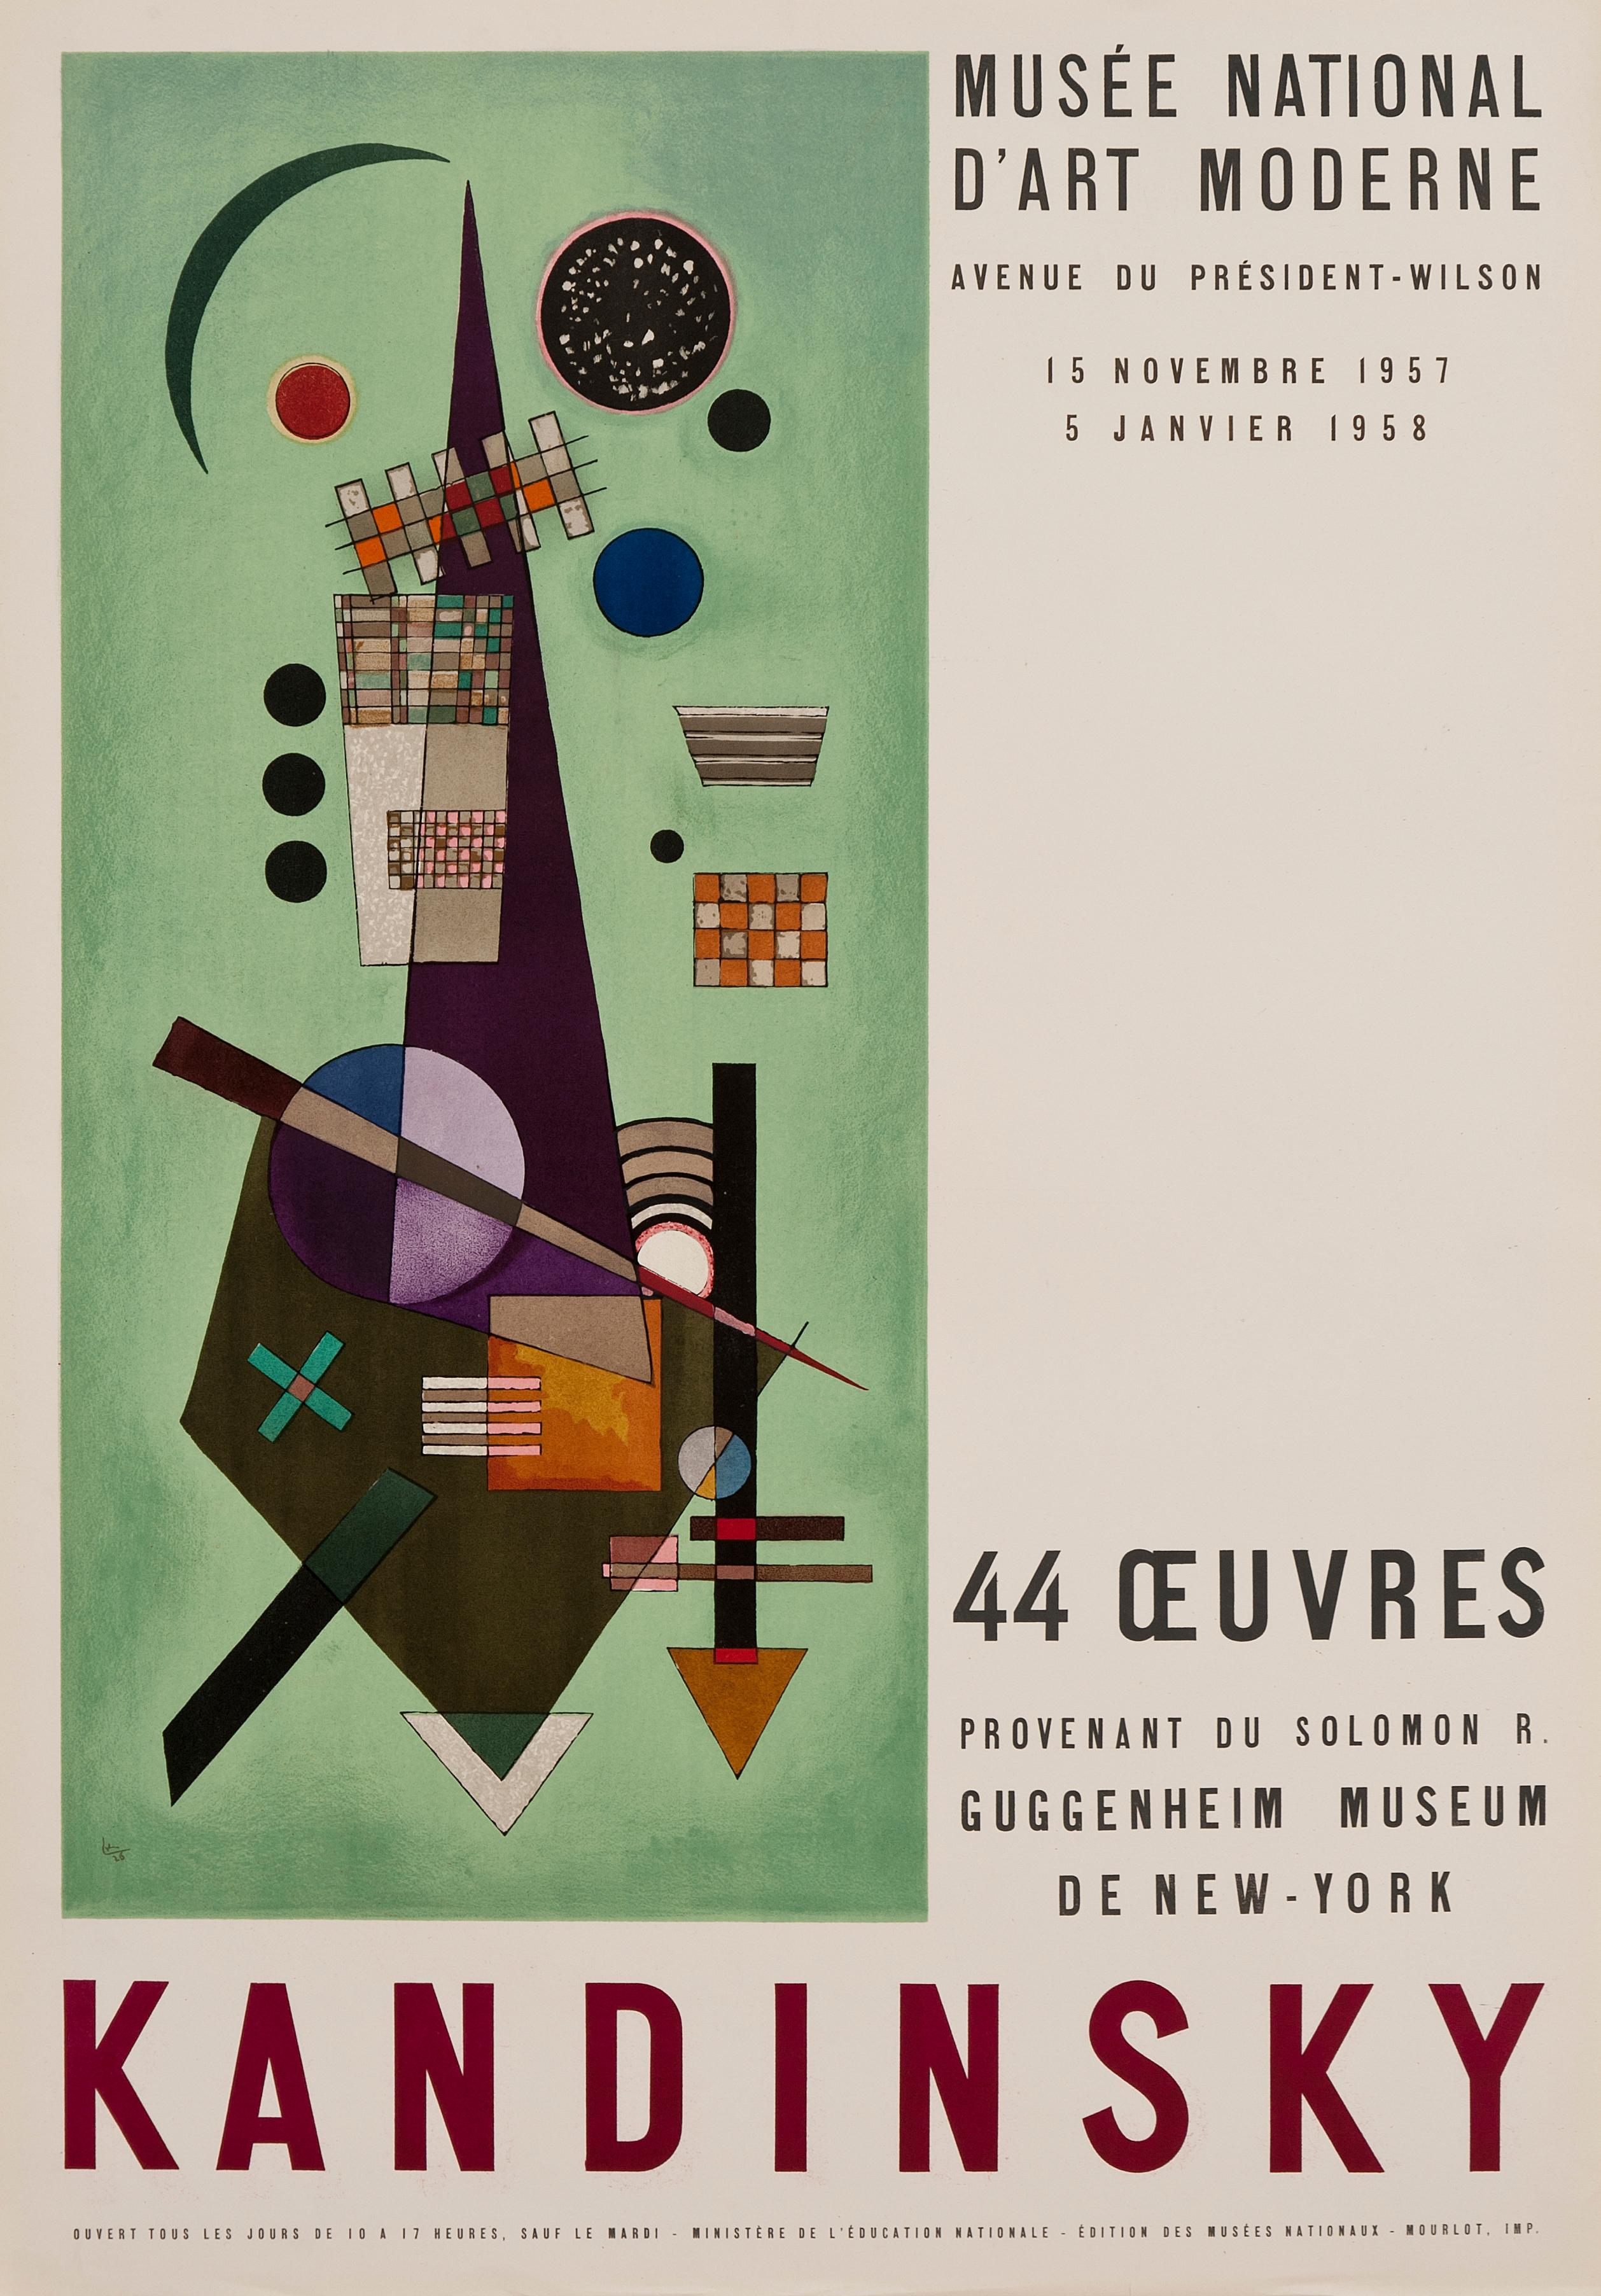 This rare lithographic poster was printed in 1957 at the Atelier Mourlot in Paris. It was created to promote an exhibition of artworks by Kandinsky, on loan from the Guggenheim Museum to the National Museum of Modern in Paris. 

Certificate of